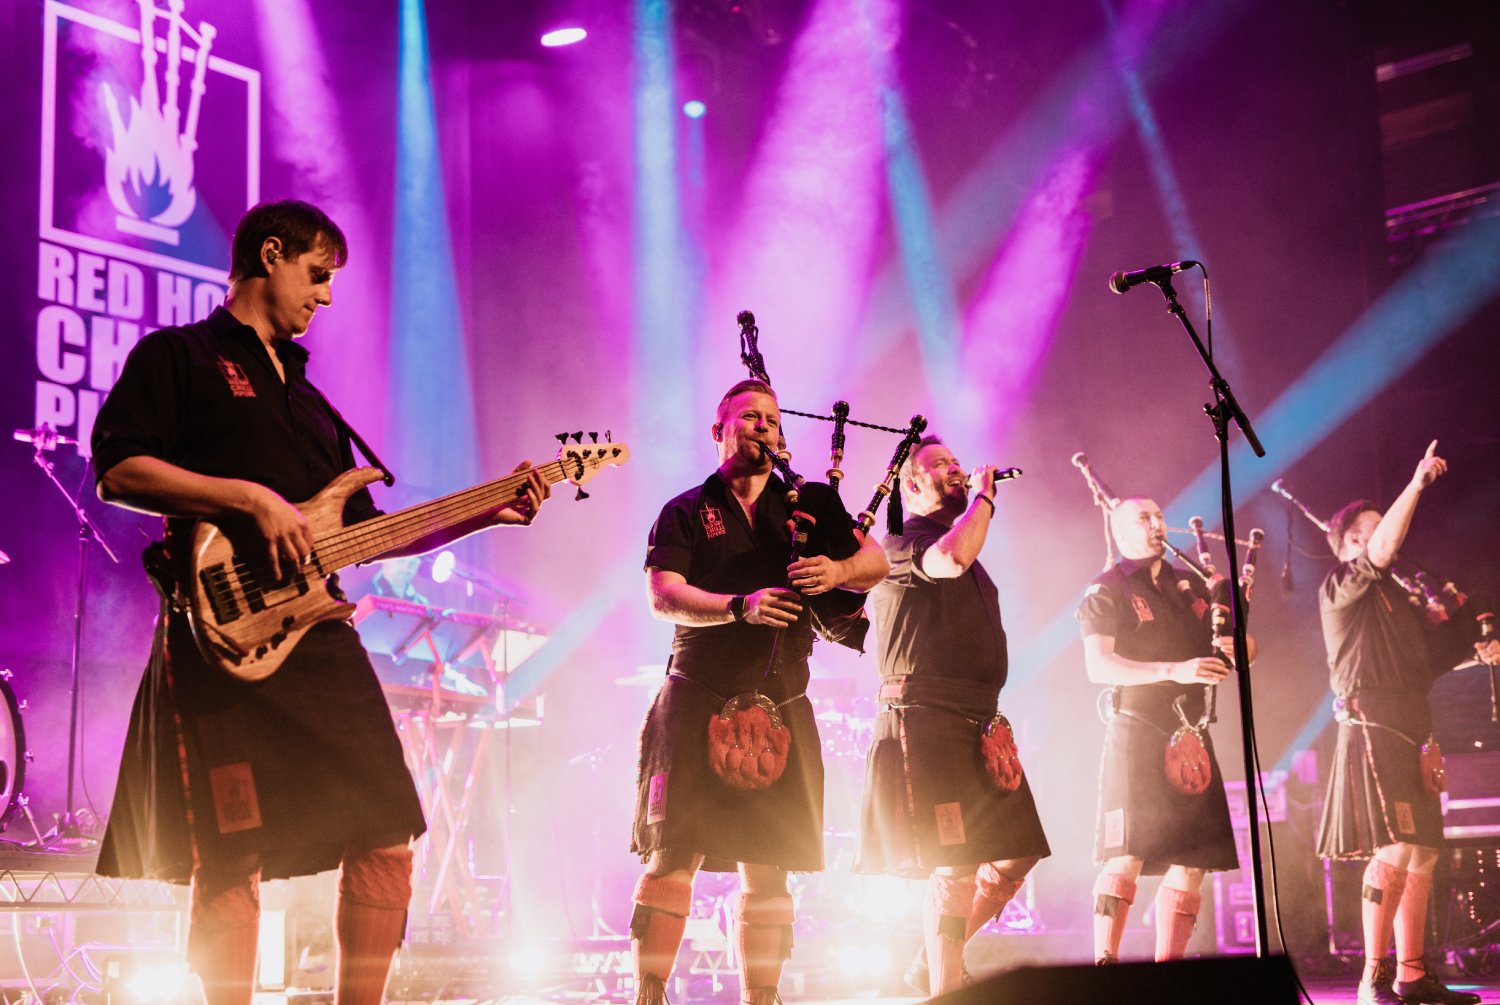 "The Red Hot Chilli Pipers" perform at Cary Hall (Lexington, MA.)